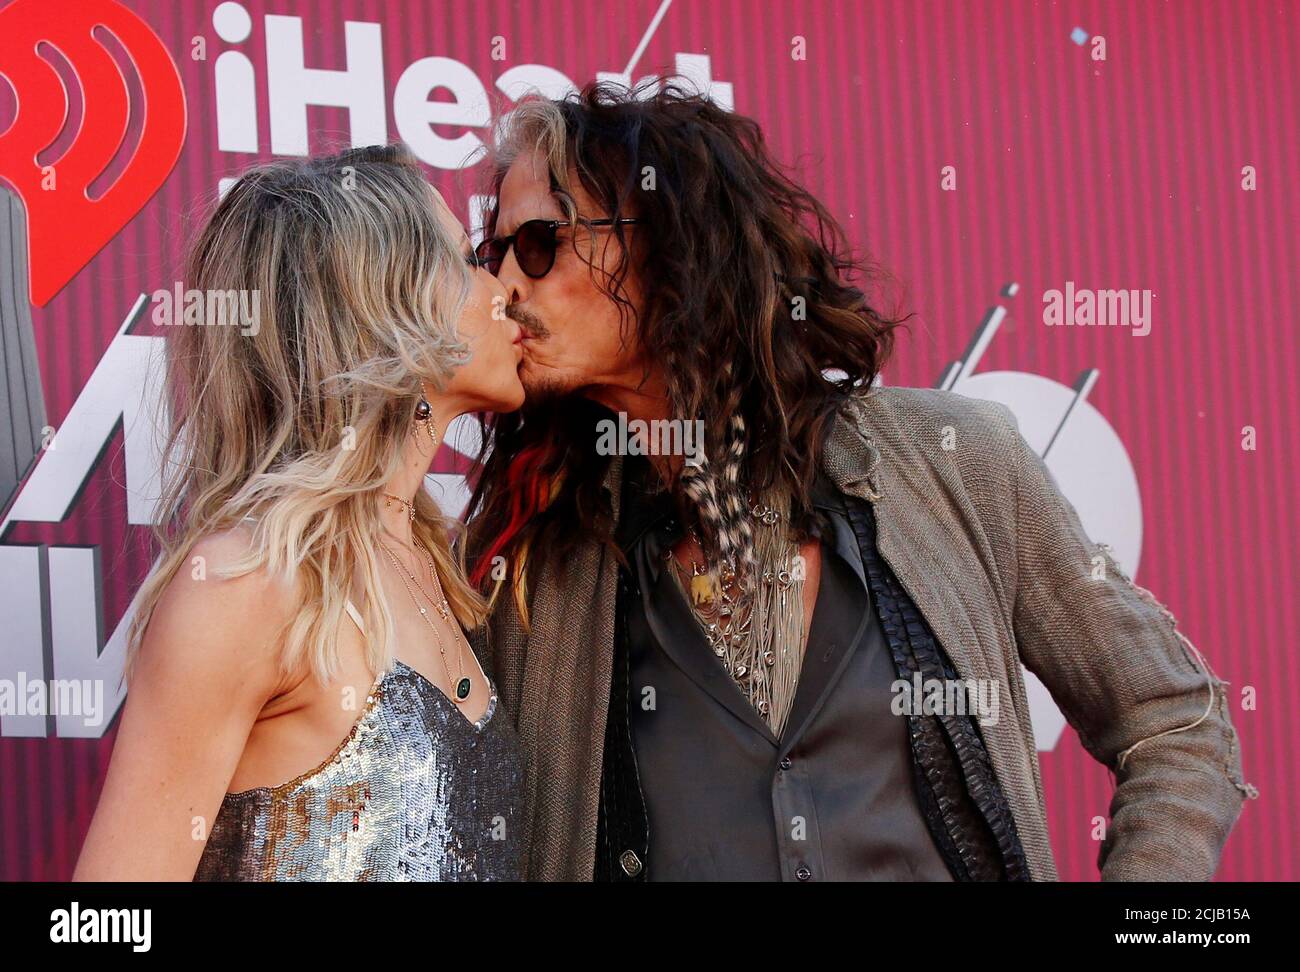 Singer Steven Tyler and Aimee Preston kiss as they arrive for the  iHeartRadio Music Awards in Los Angeles, California, U.S., March 14, 2019.  REUTERS/Mario Anzuoni Stock Photo - Alamy